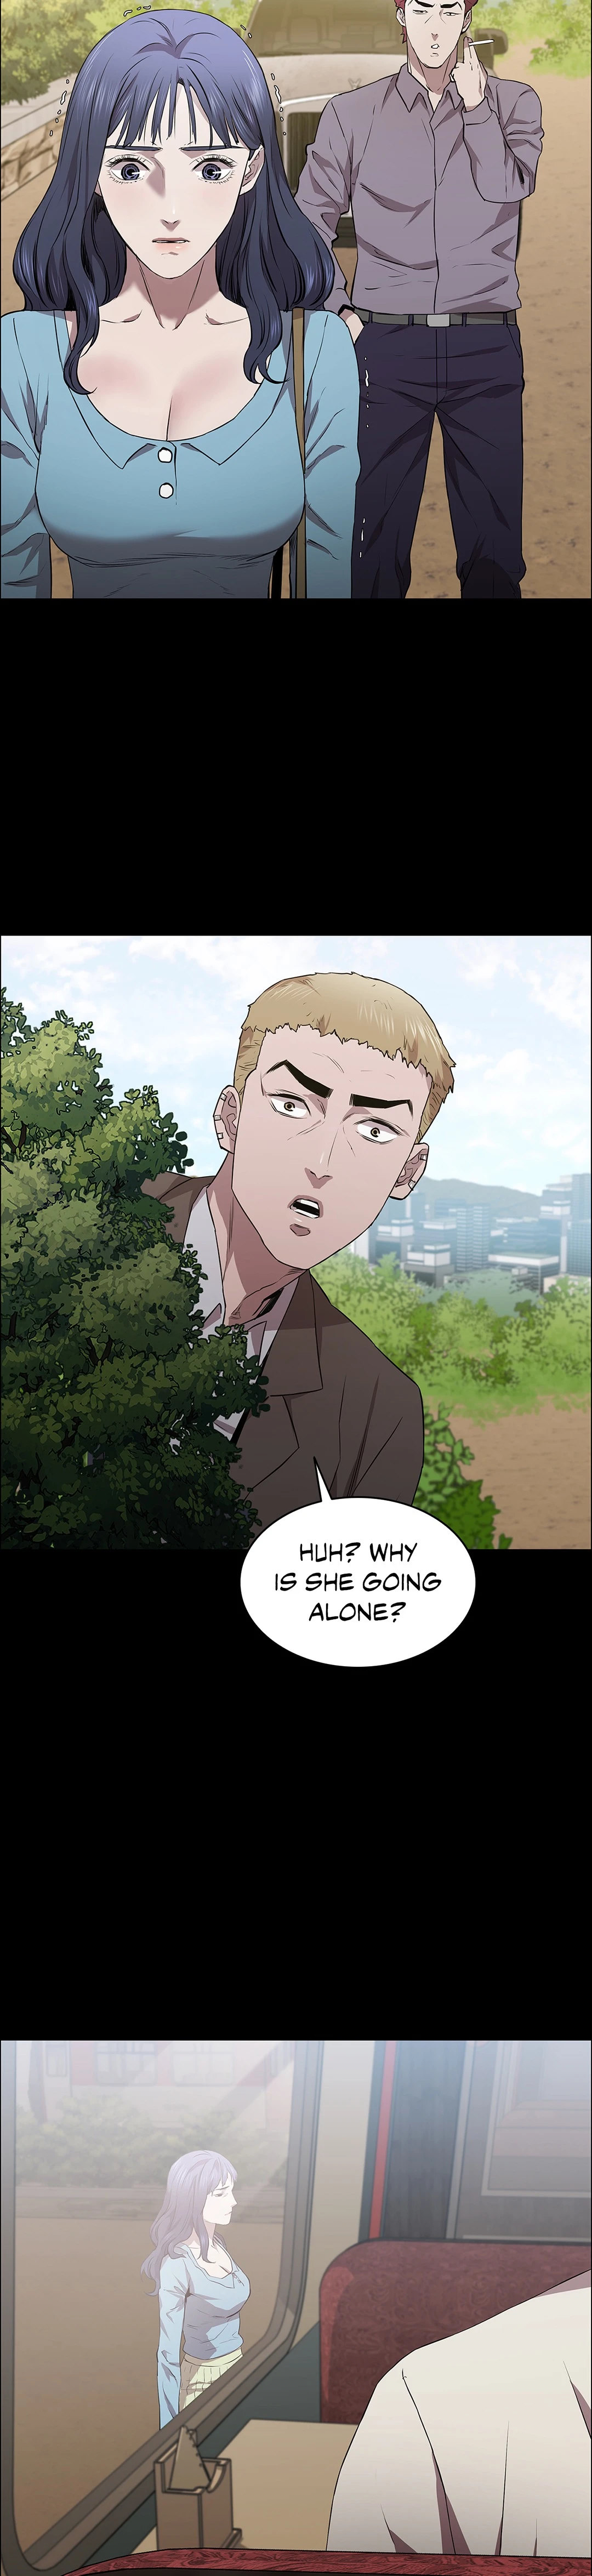 Thorns on Innocence - Chapter 20 Page 14